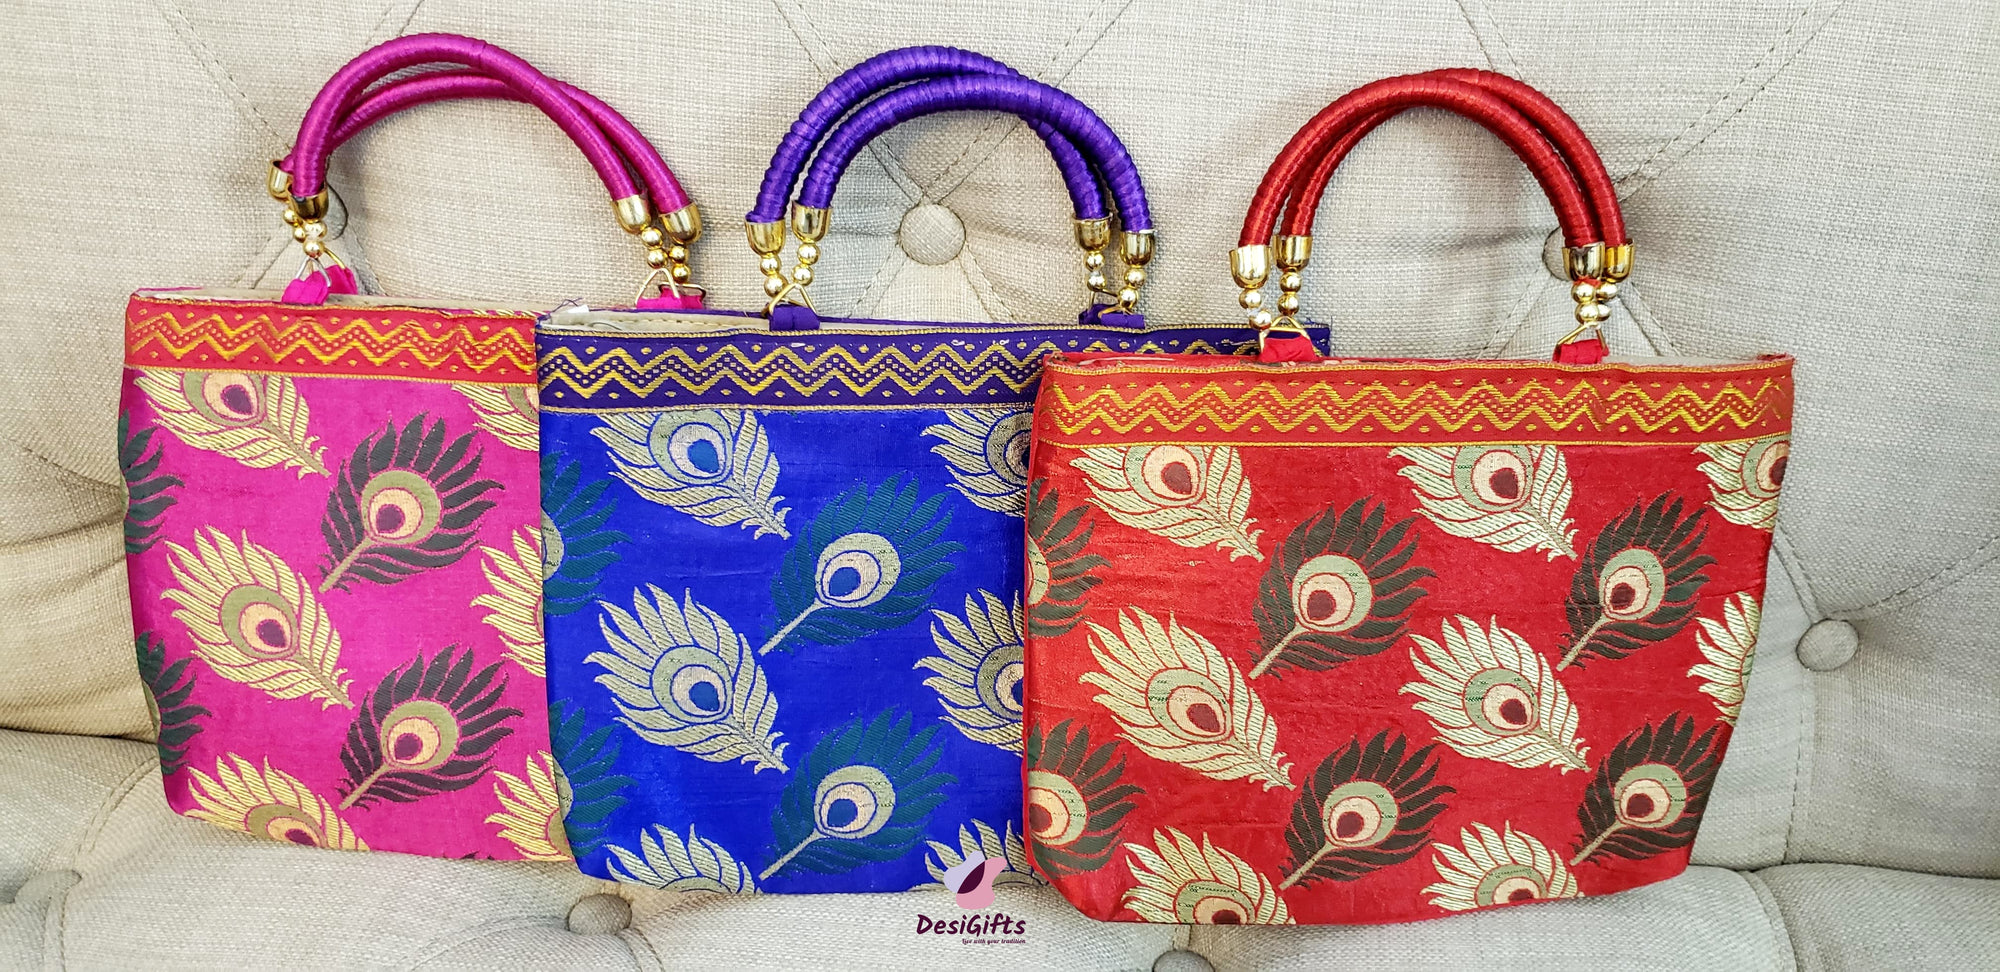 Beautiful Indian Girl Printed Suitcase Style Clutch - Artklim